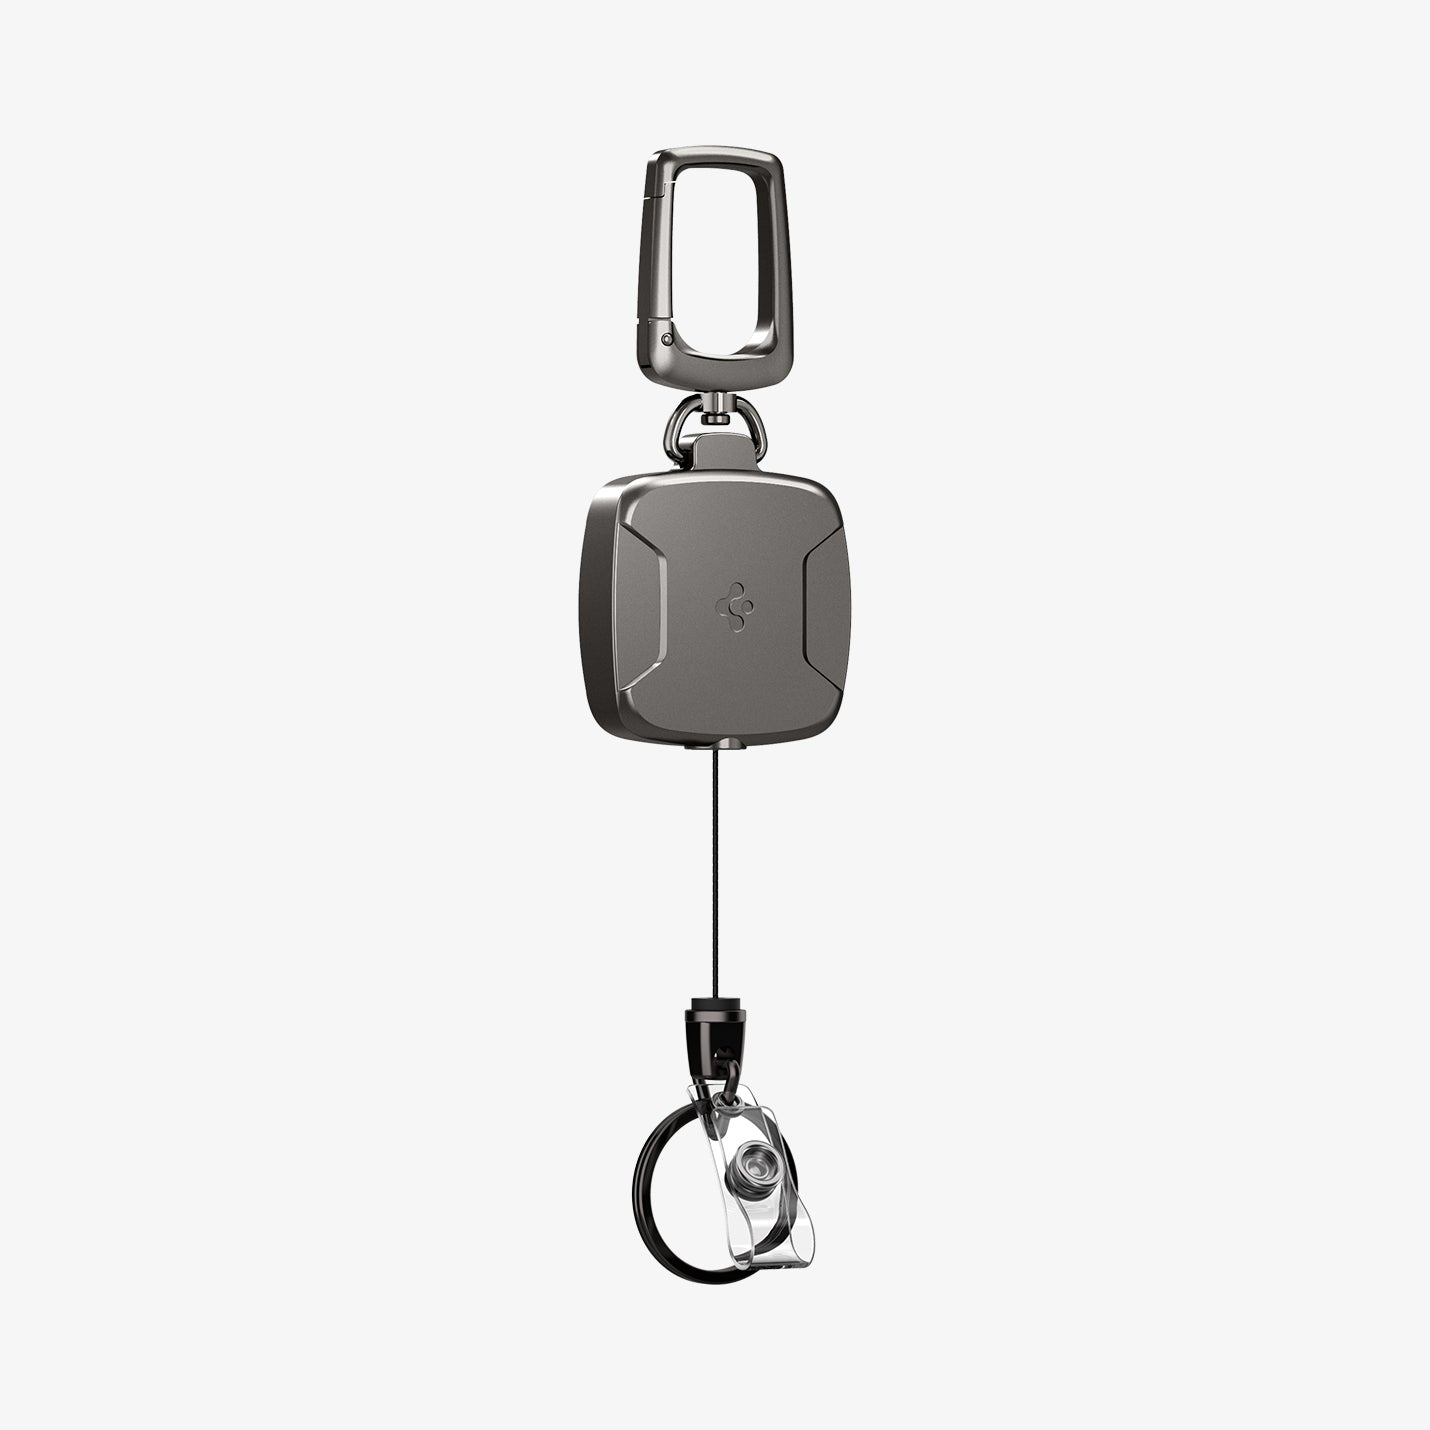 AHP03019 - Carabiner Reel Clip in black showing the back and partial side